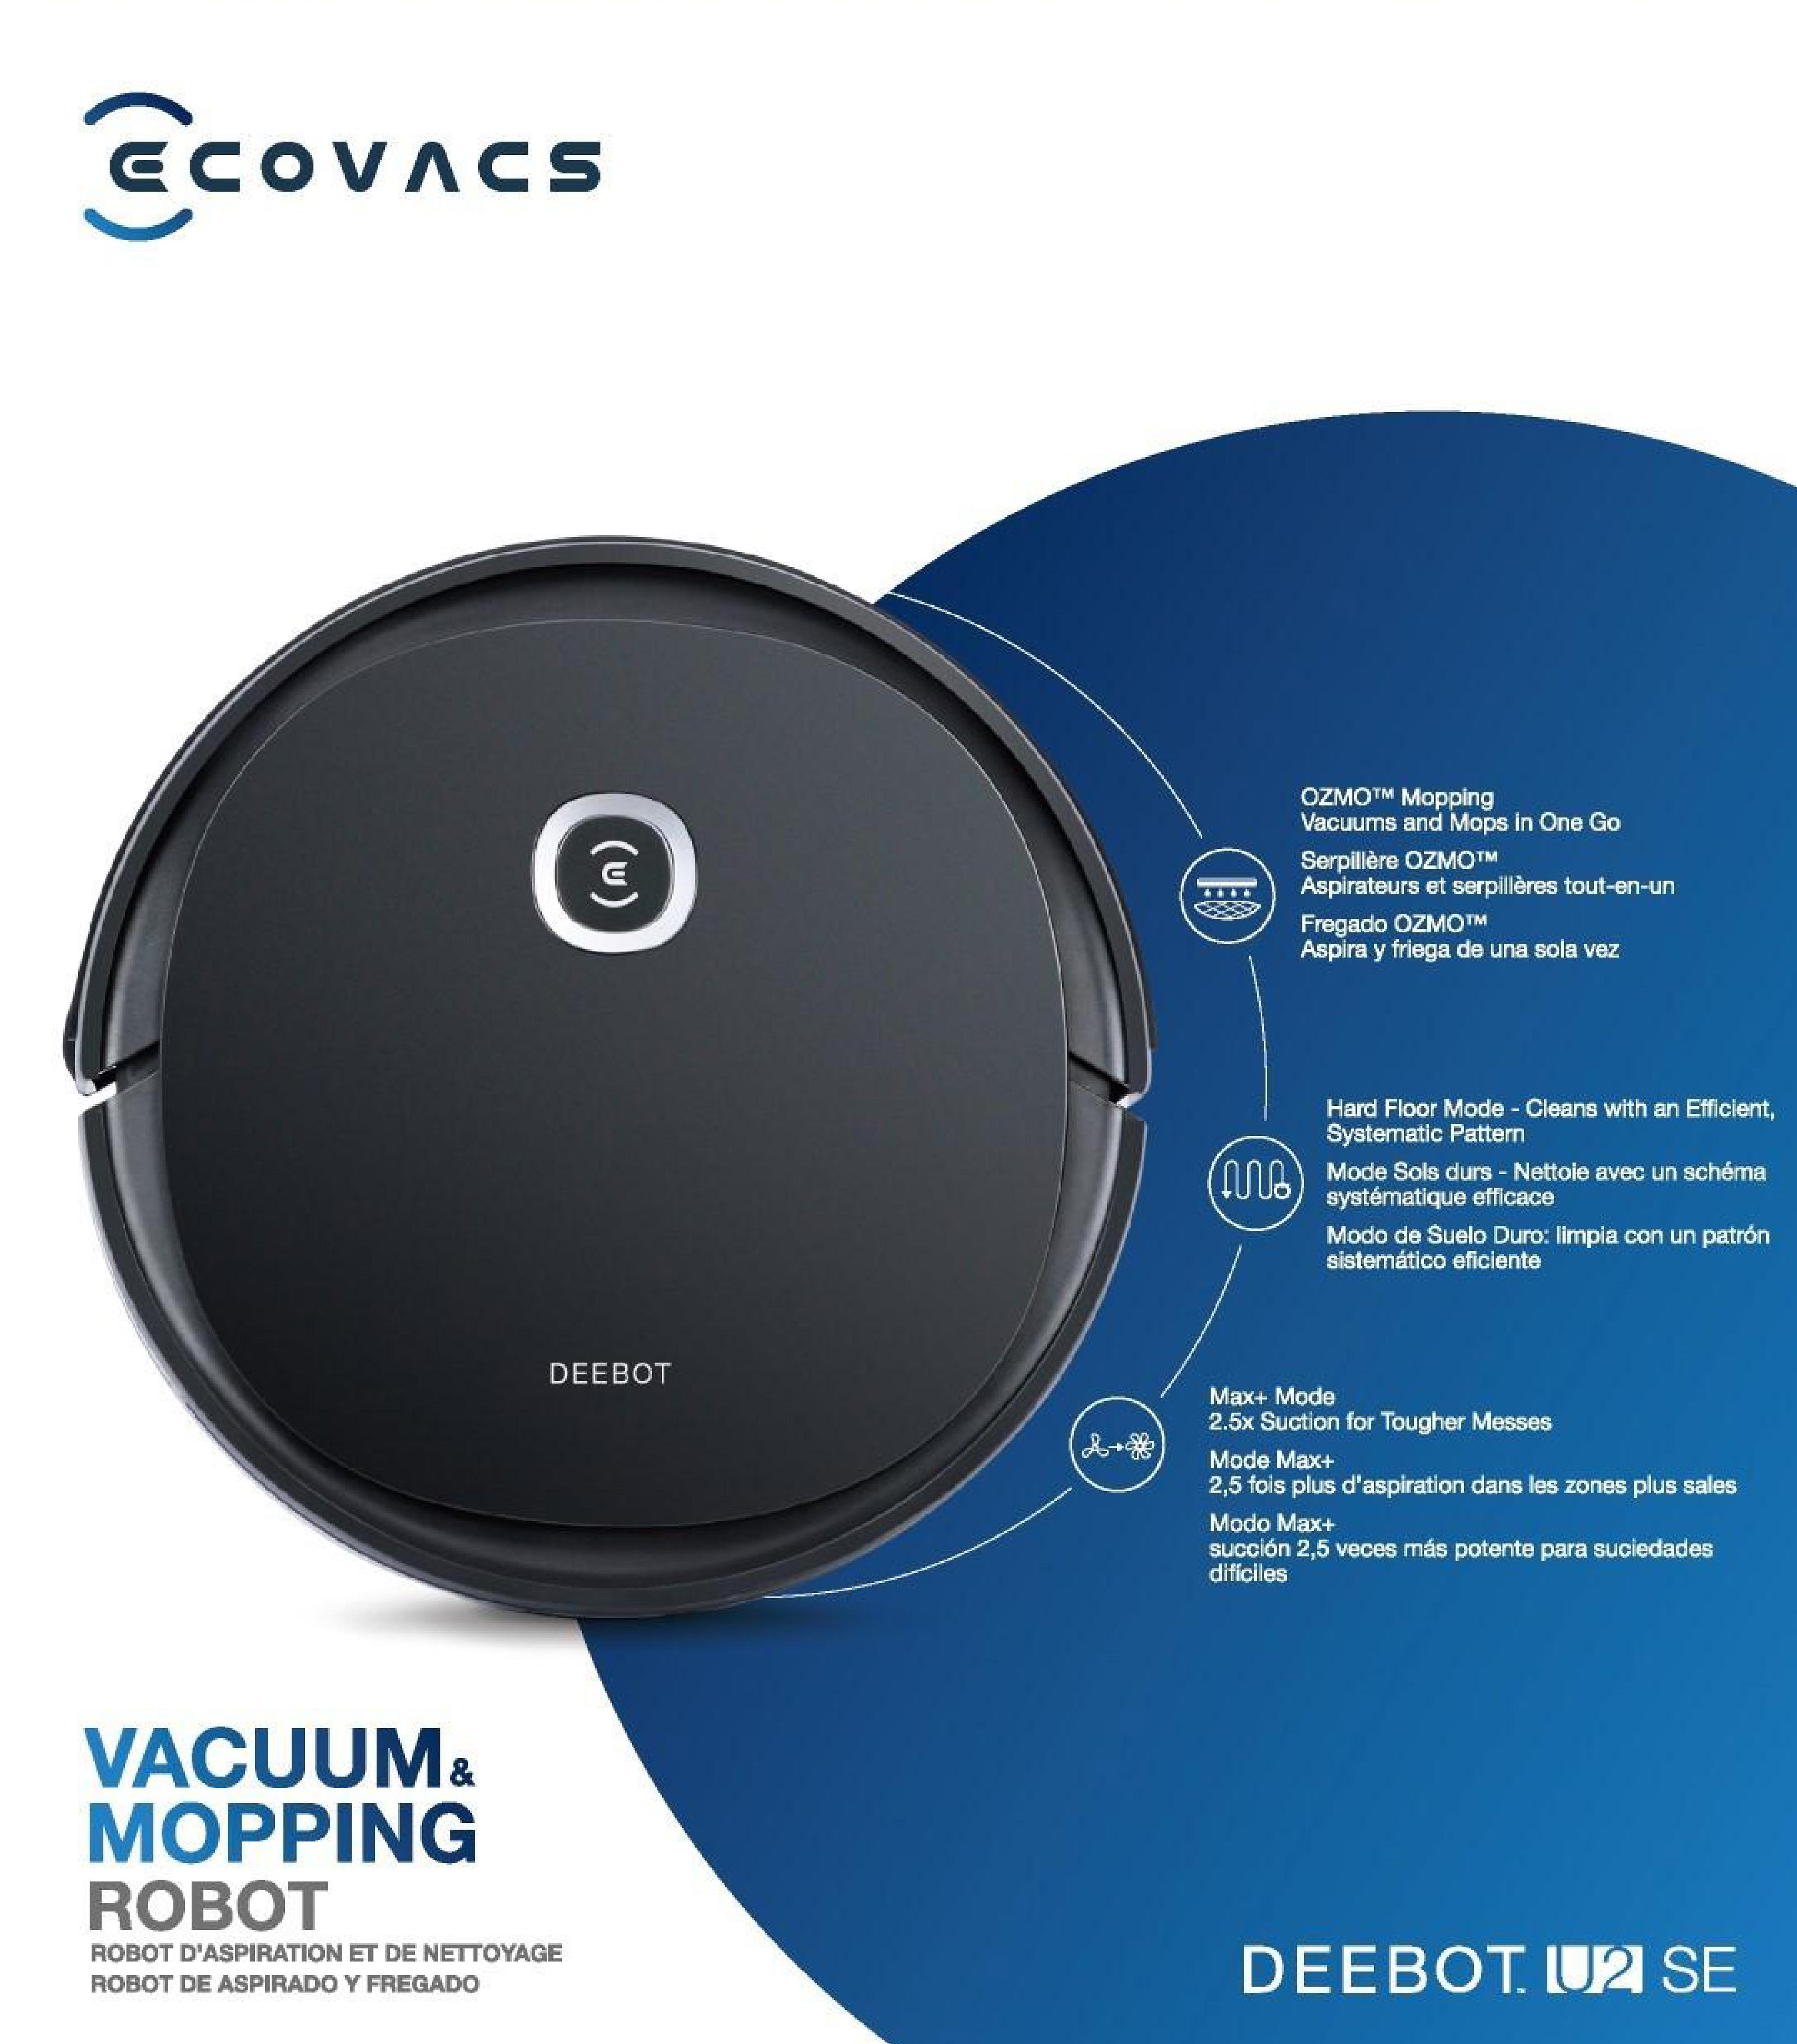 ECOVACS DEEBOT U2SE Robot Vacuum Cleaner and Mop with WiFi & App - image 2 of 8